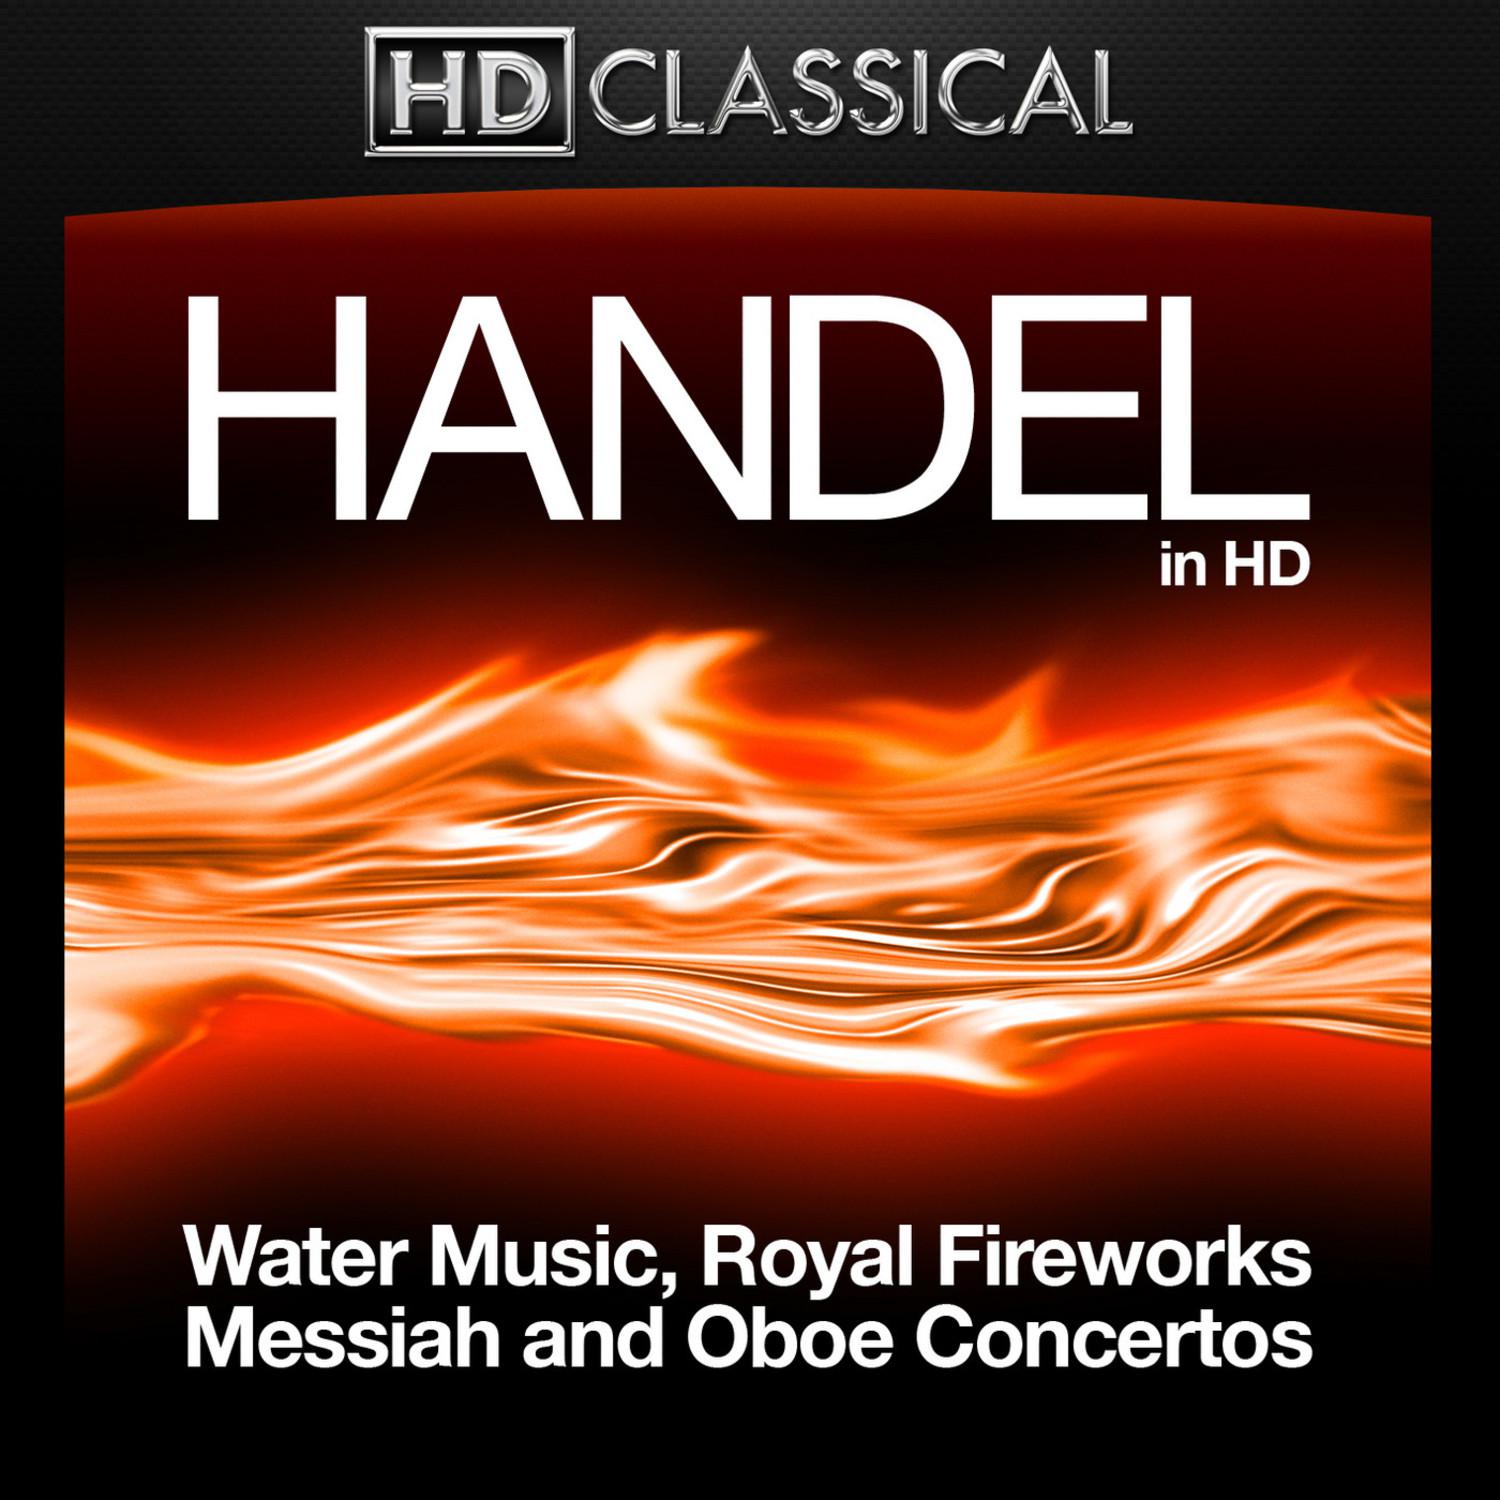 Water Music Suite No. 3 in G Major, HWV 350: IV. Minuet I